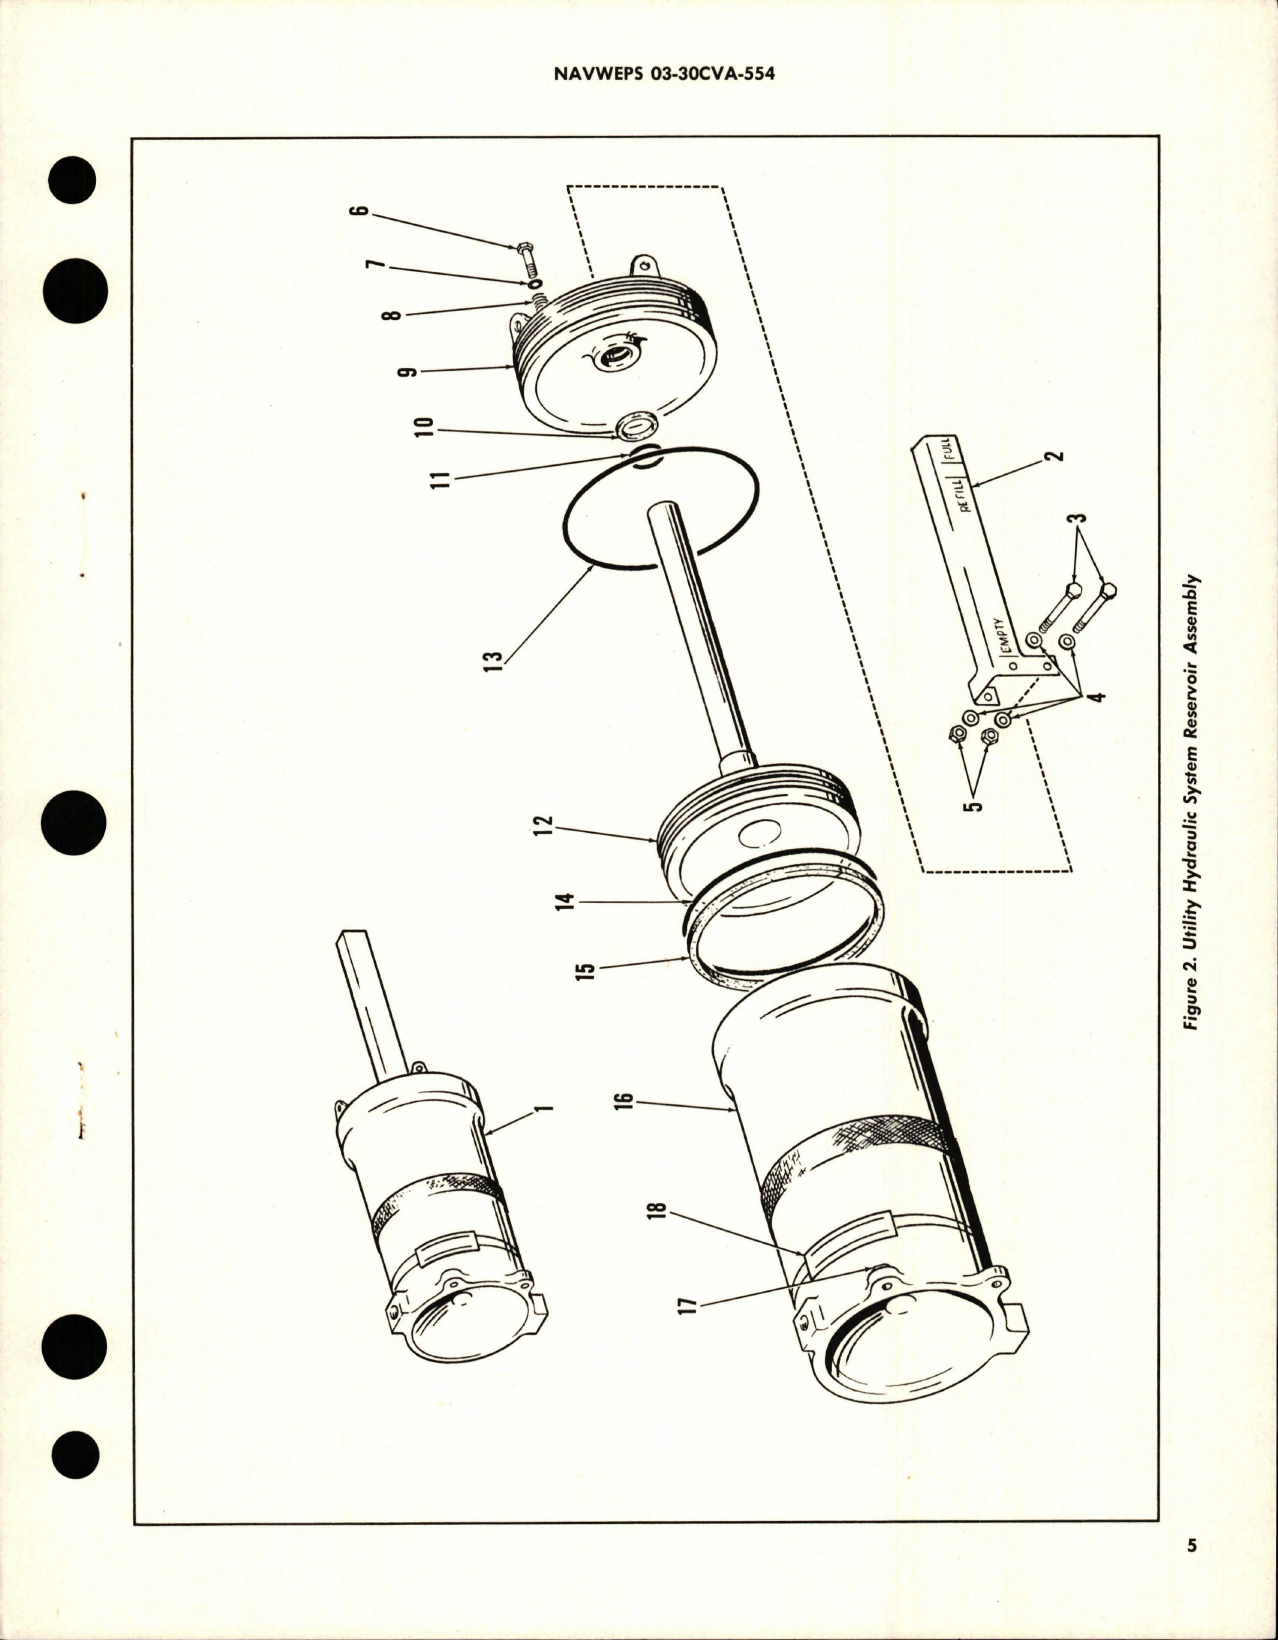 Sample page 5 from AirCorps Library document: Overhaul Instructions with Parts Breakdown for Utility Hydraulic System Reservoir Assembly - CV15-401126-3 and CV15-401126-4